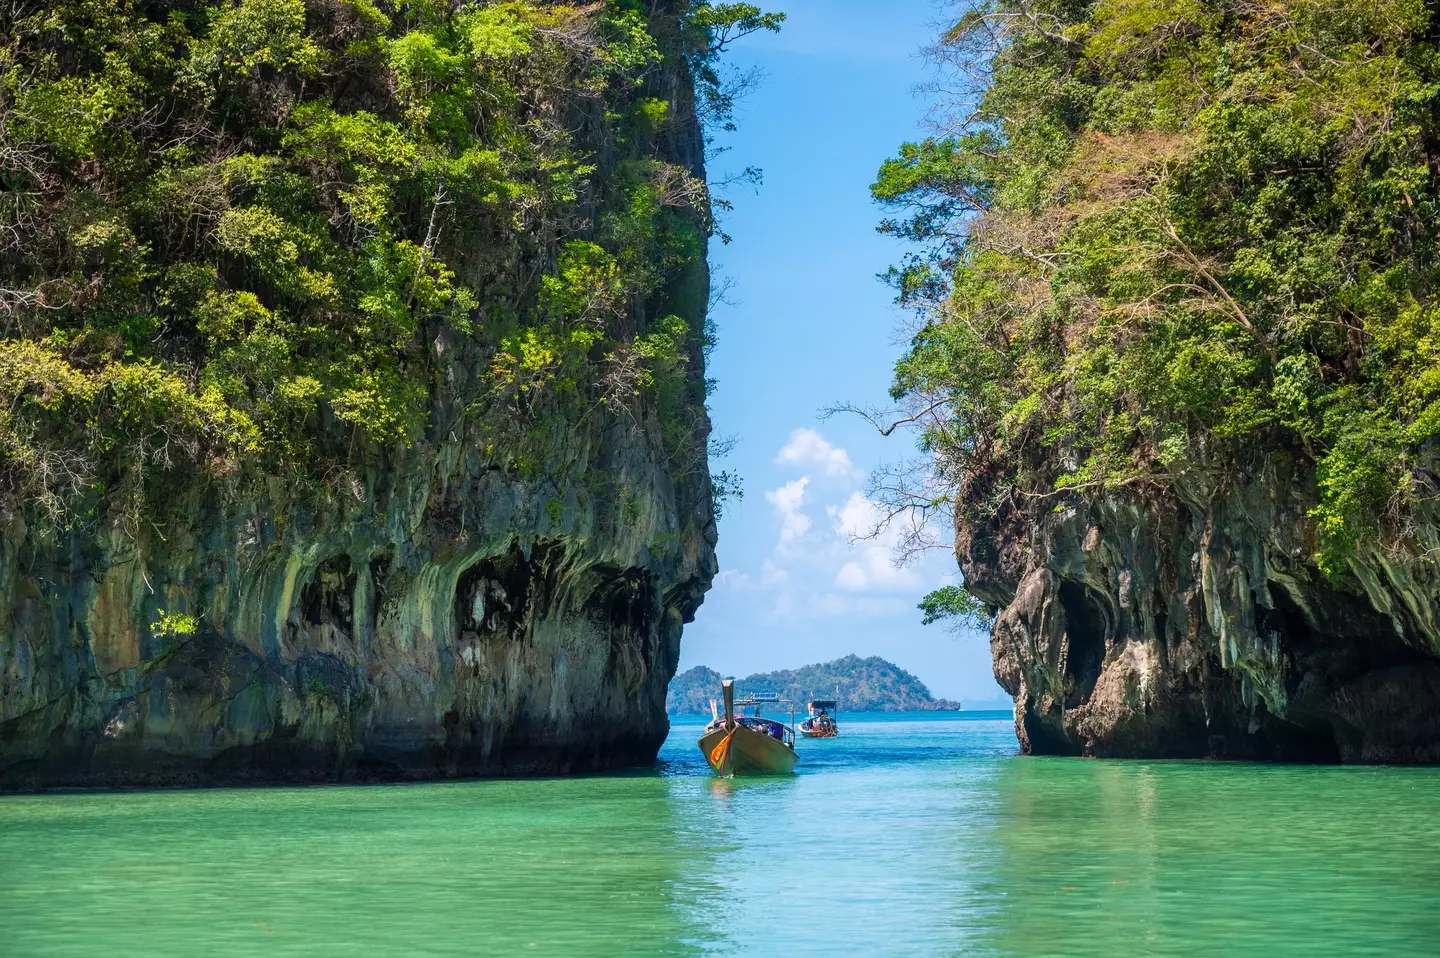 Seas and islands surround the sandy beach of Koh Hong in Krabi, Thailand (Getty Stock Images)